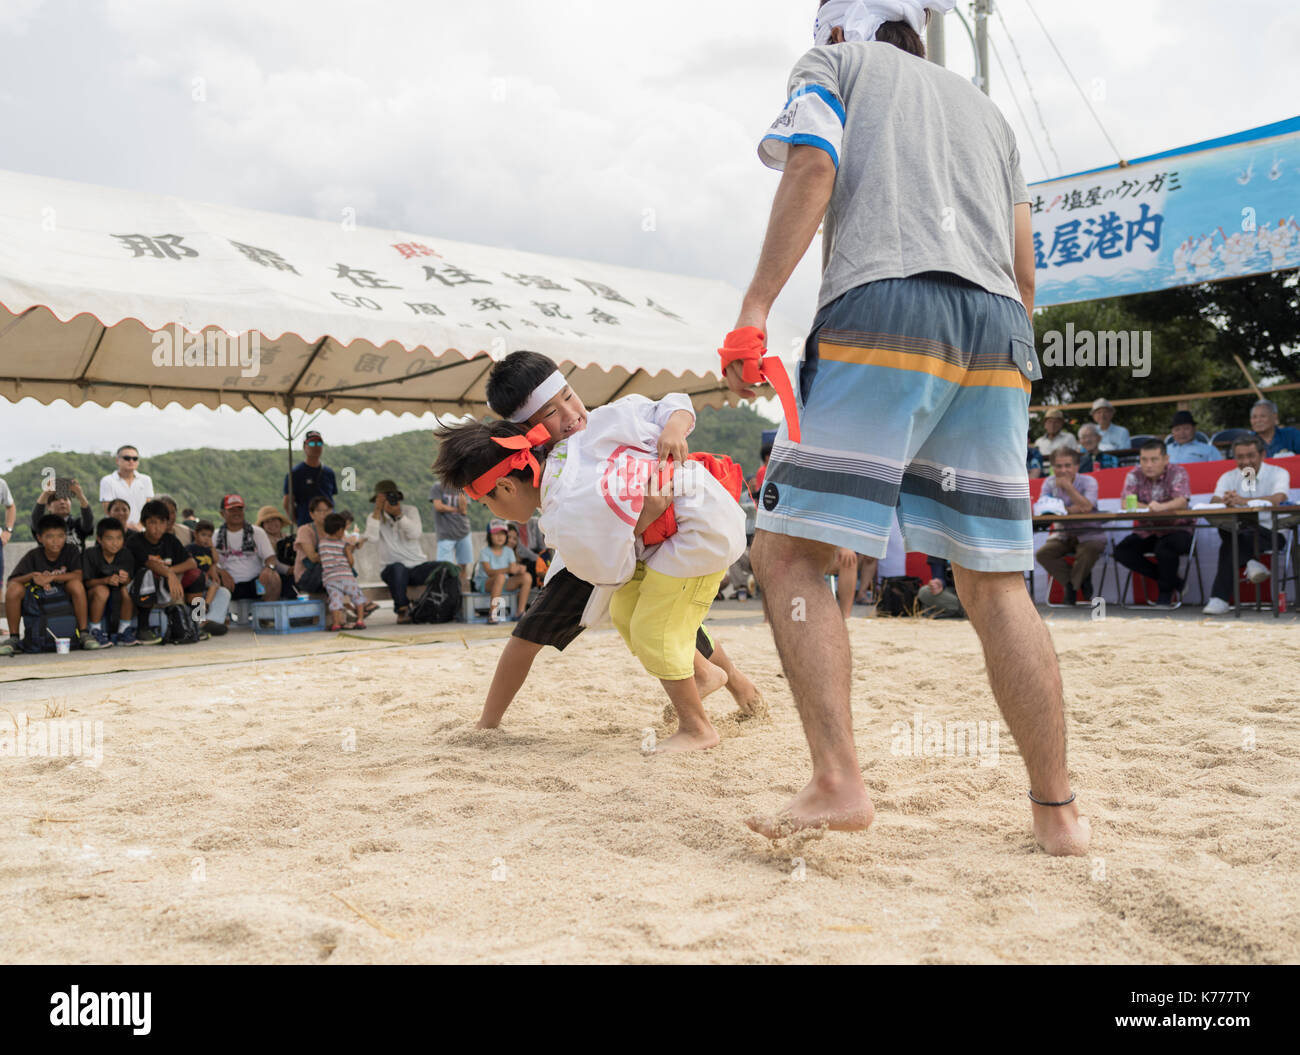 Elementary school children taking part in tegumi a traditional form of wrestling from Okinawa. Shioya, Ogimi Village, Okinawa, Japan Stock Photo